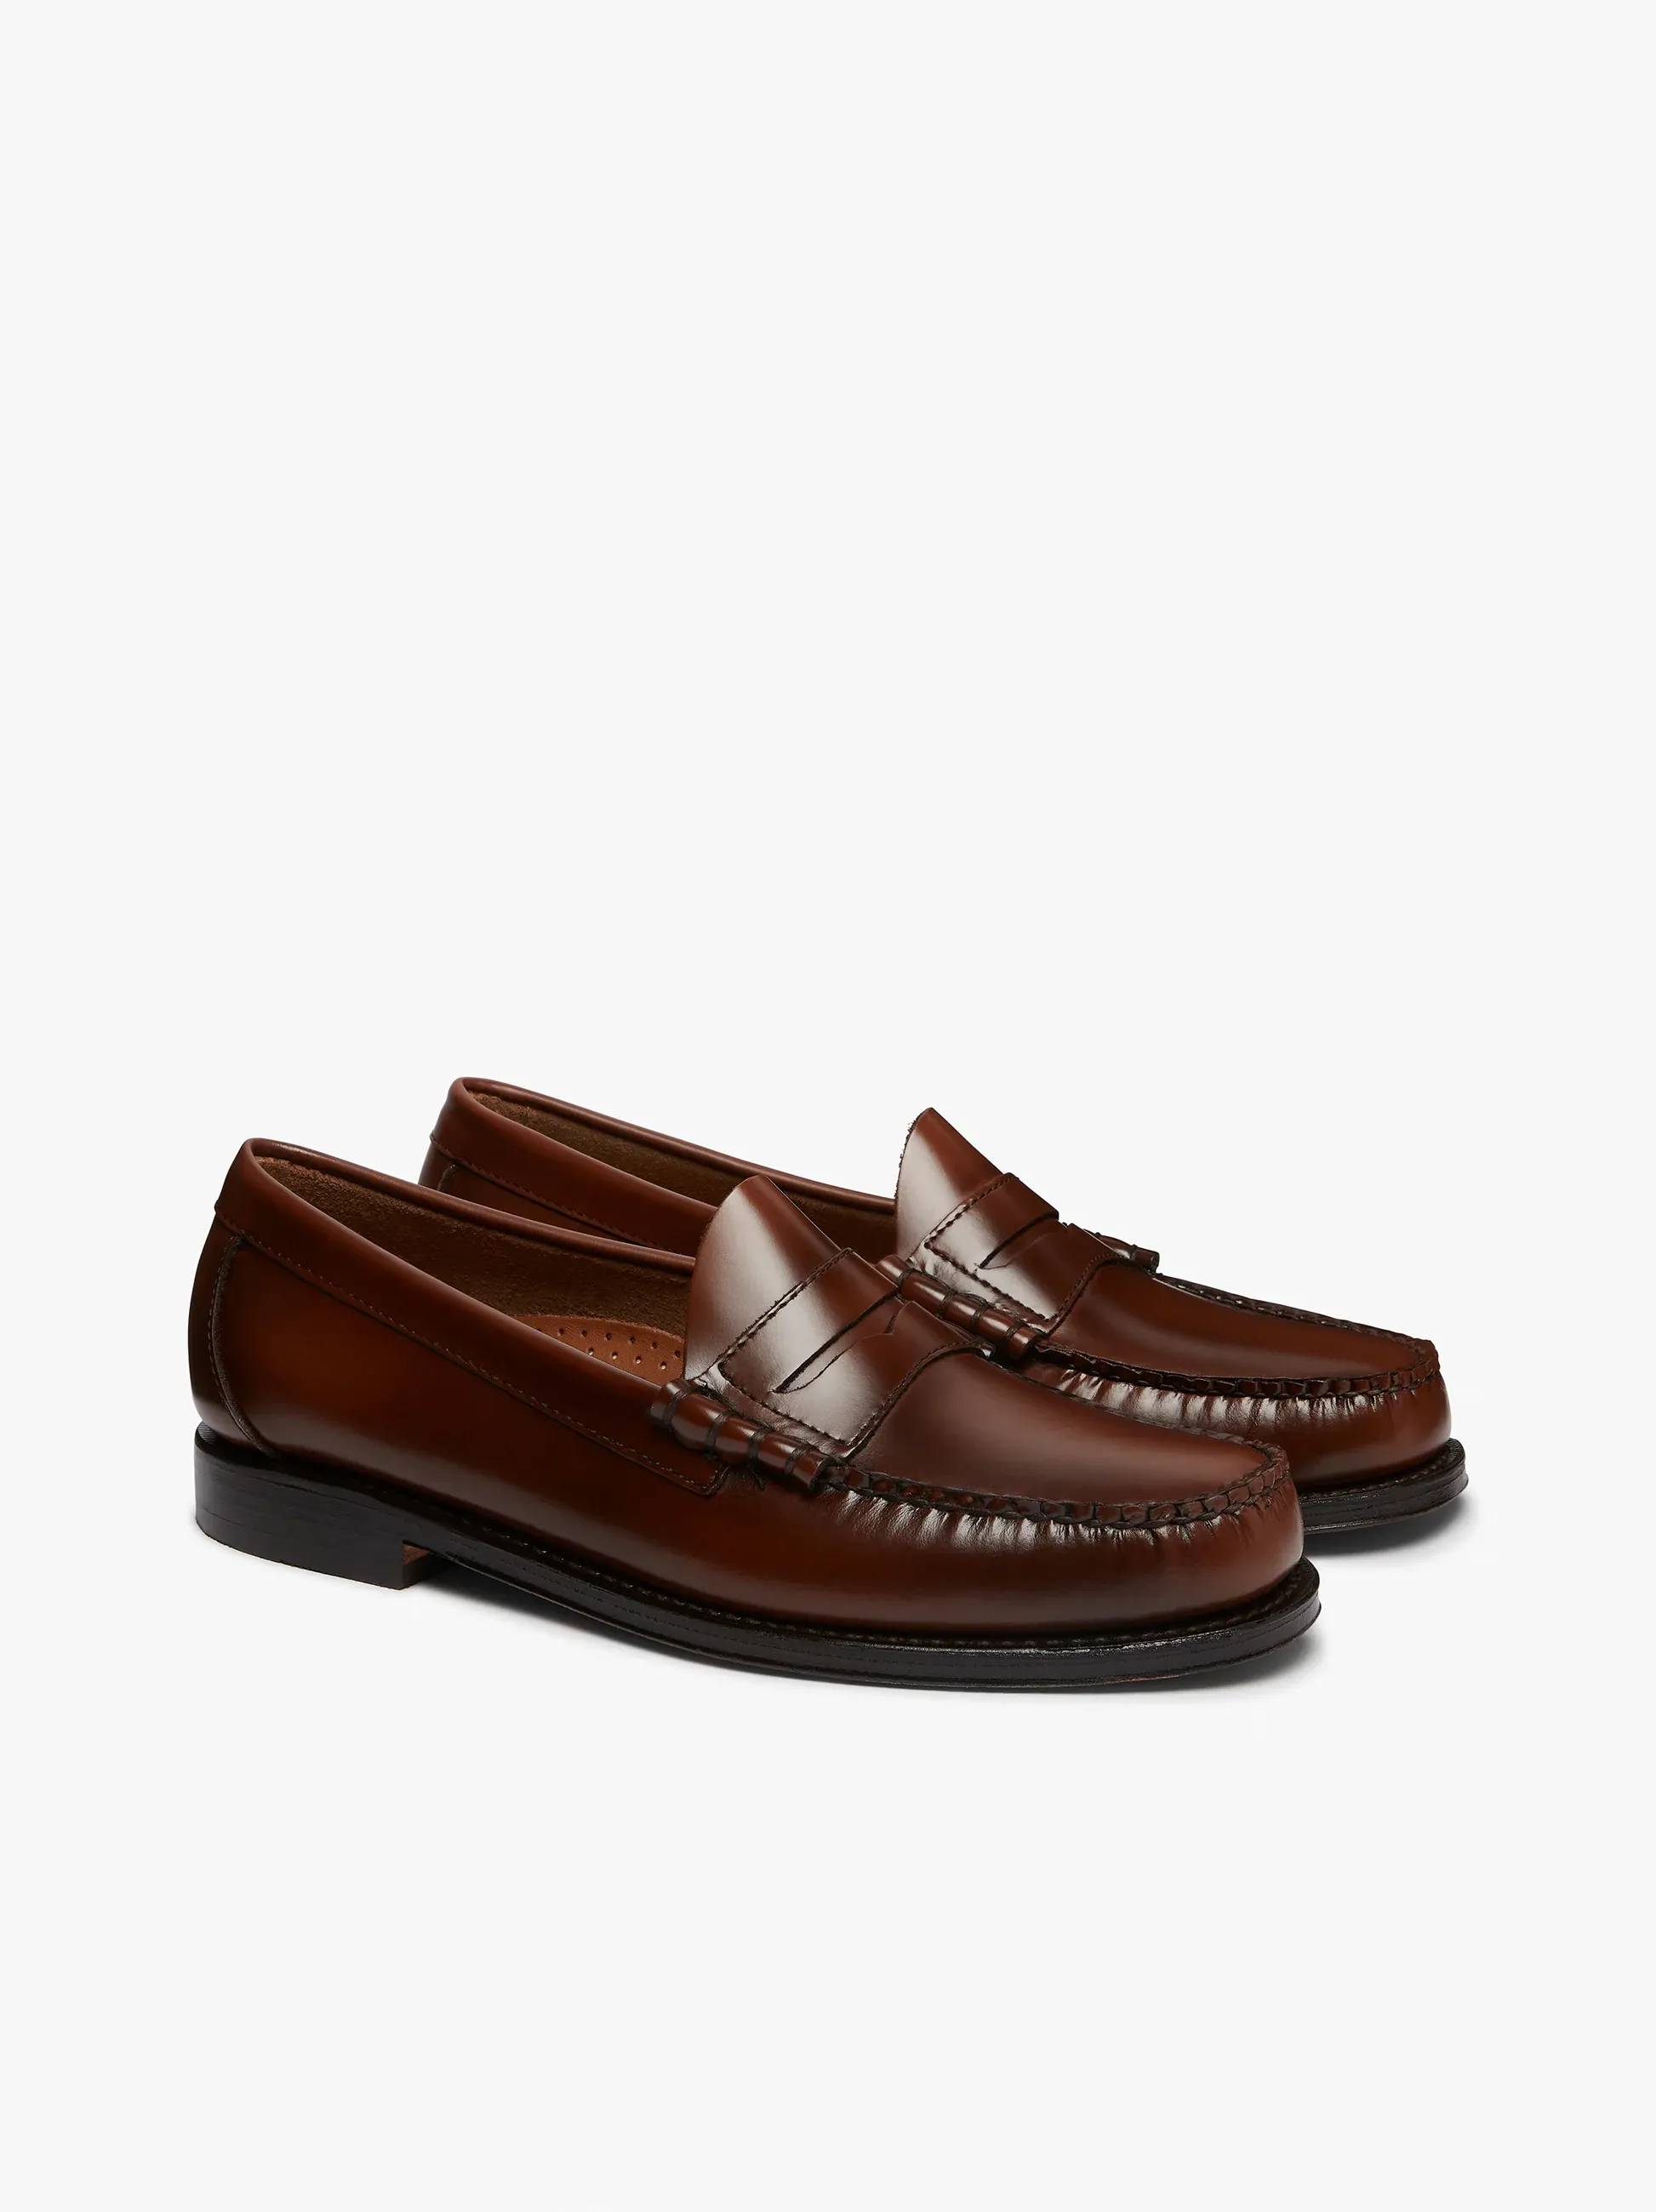 Men: Not digging the ugly sneaker trend? Try these sleeker options from  Ferragamo